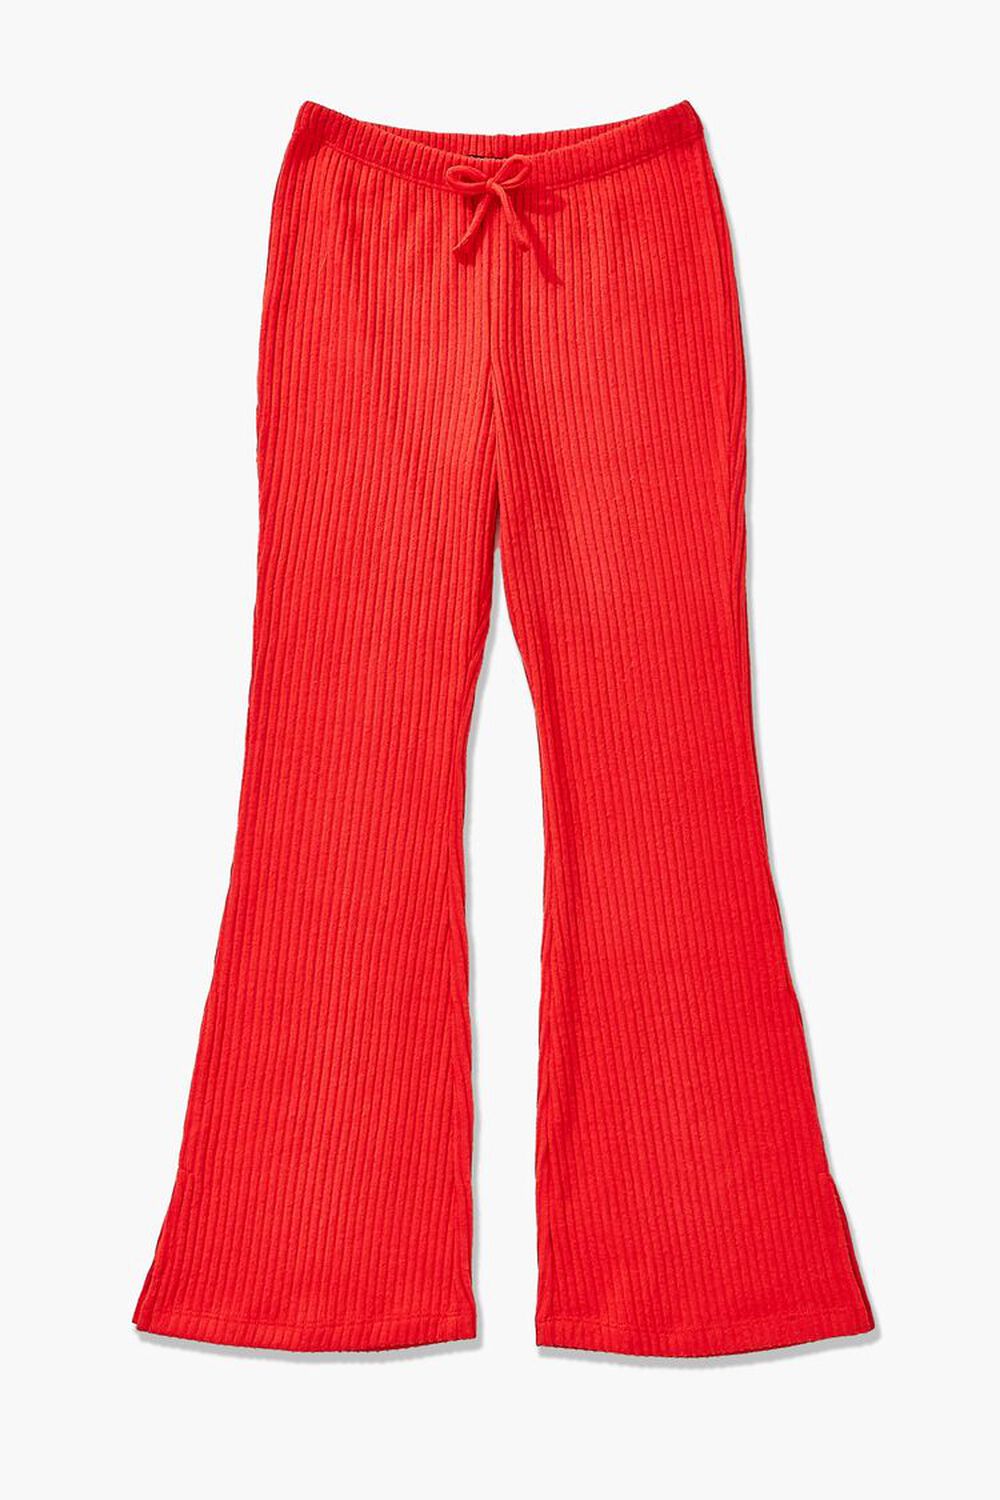 RED Girls Ribbed Flare Pants (Kids), image 1